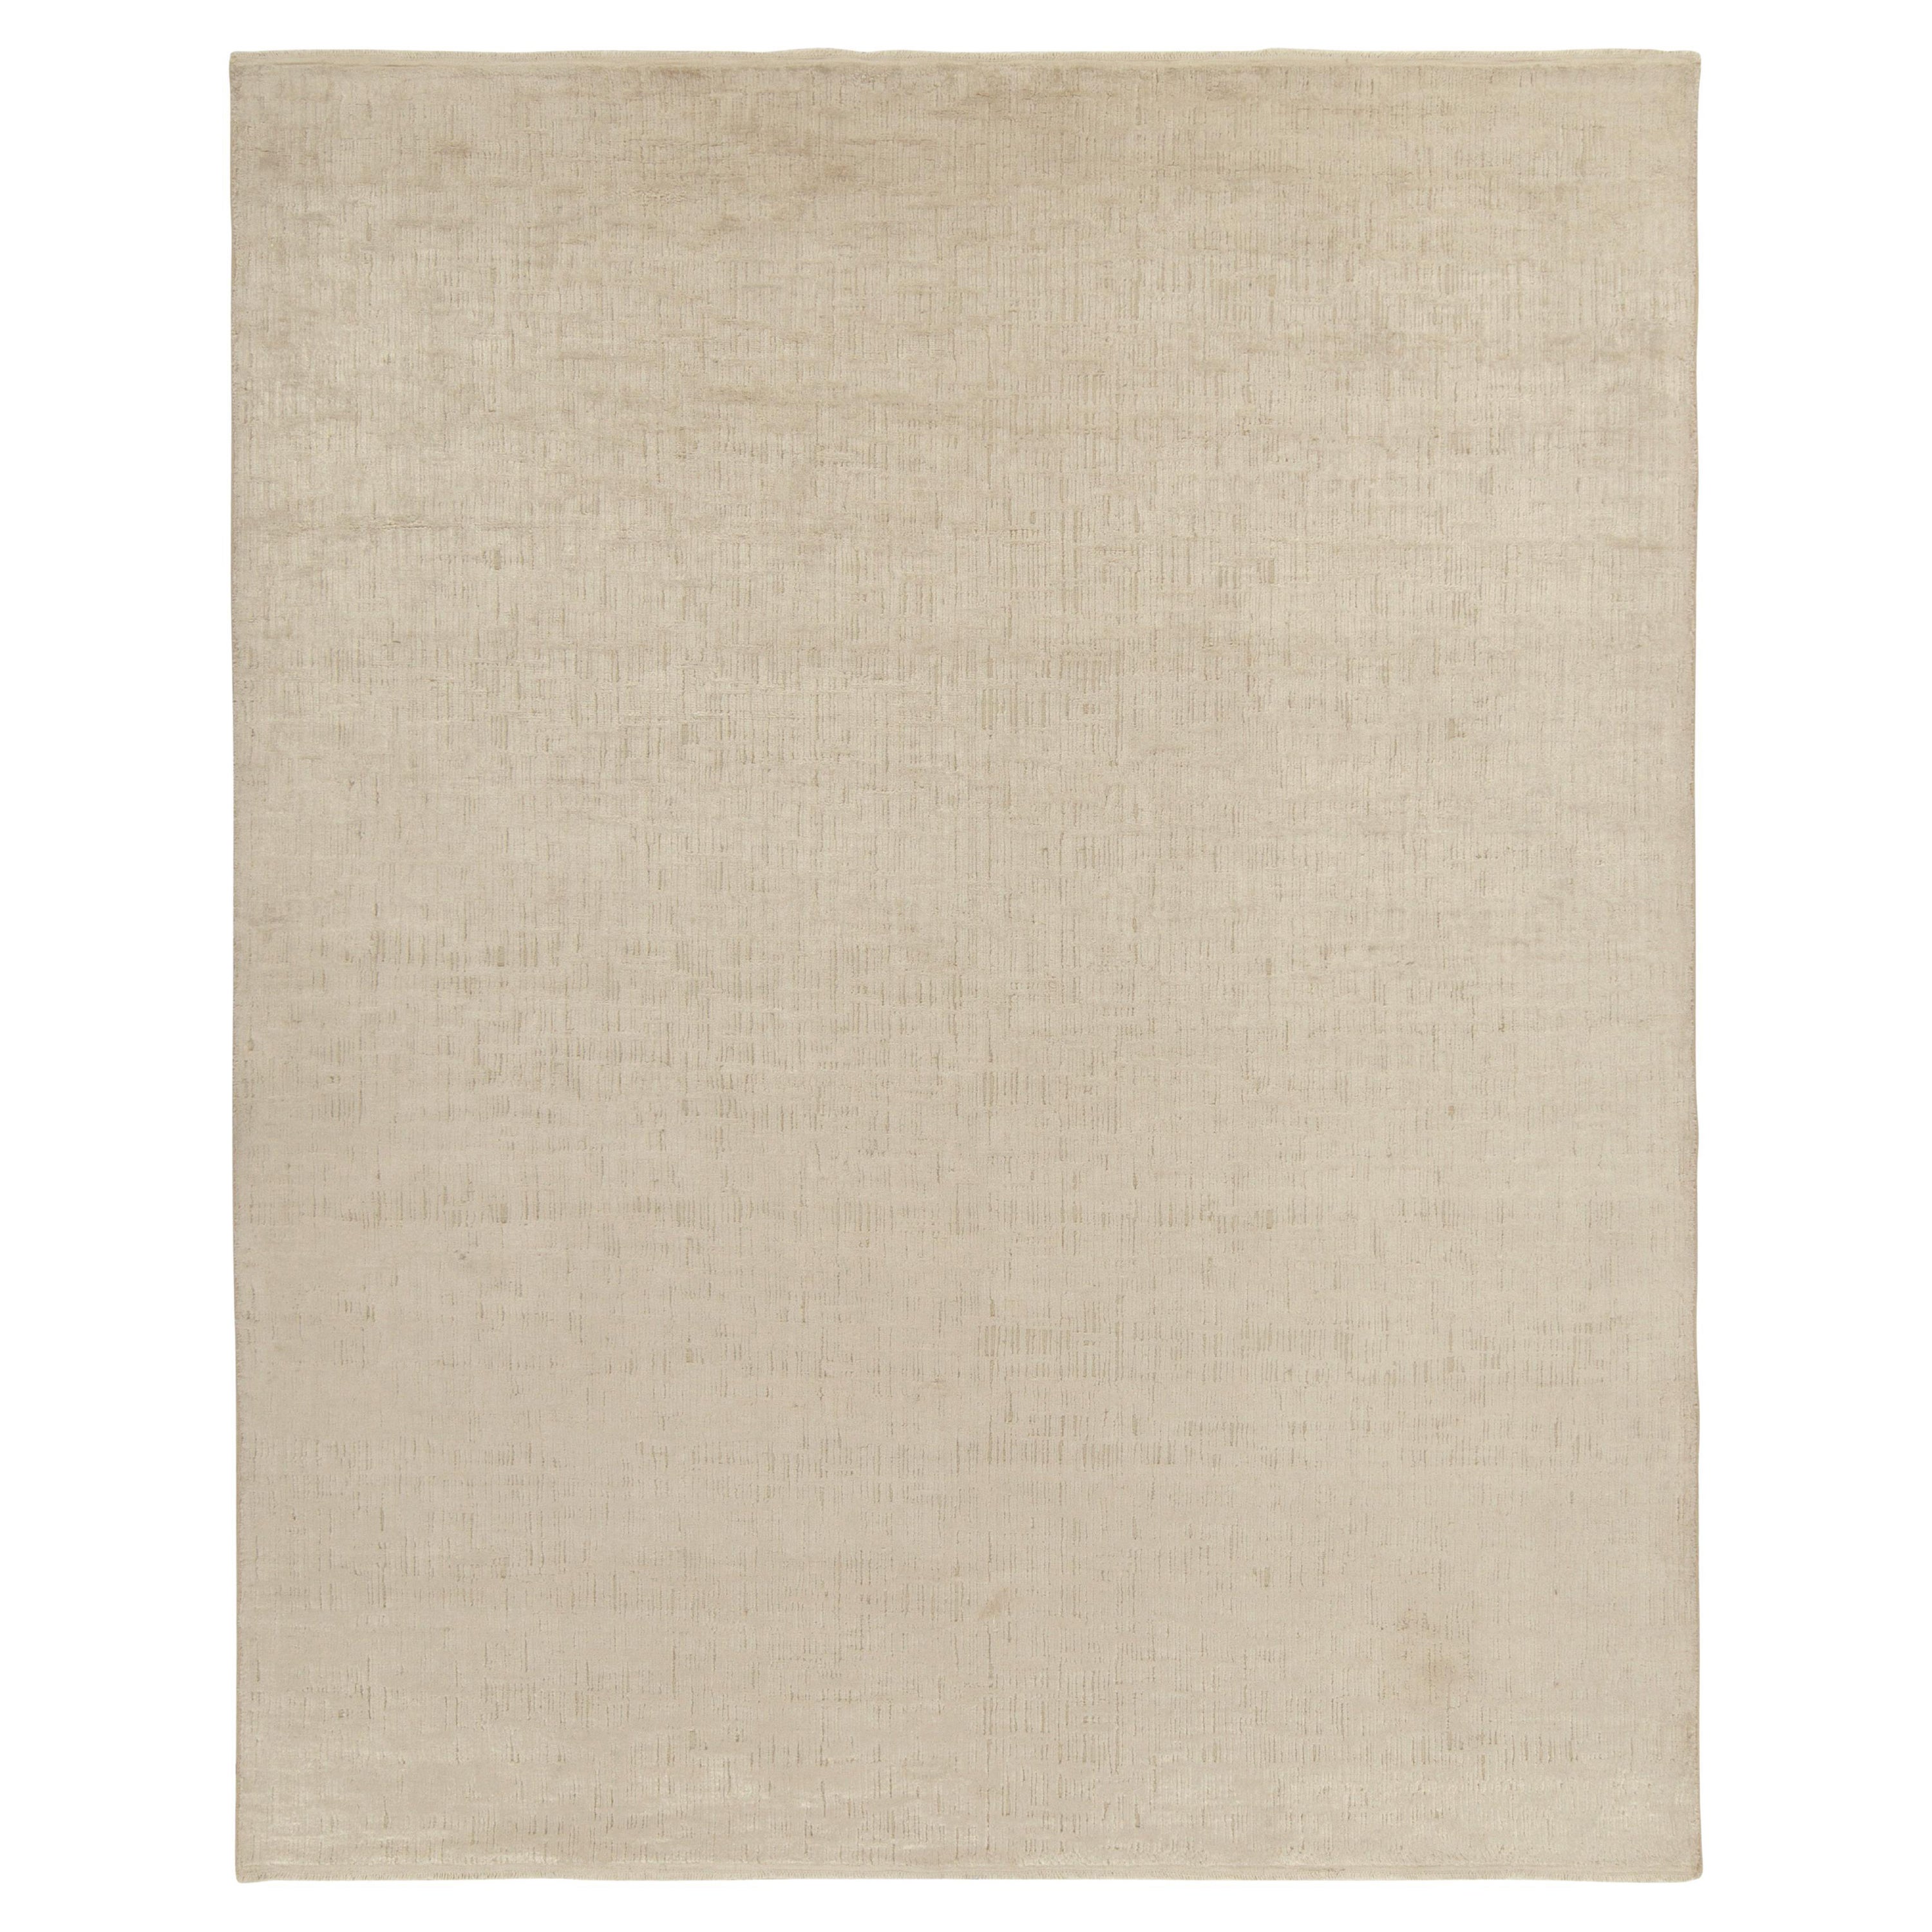 Rug & Kilim’s Contemporary Rug in Beige and Off-White, Reversible For Sale